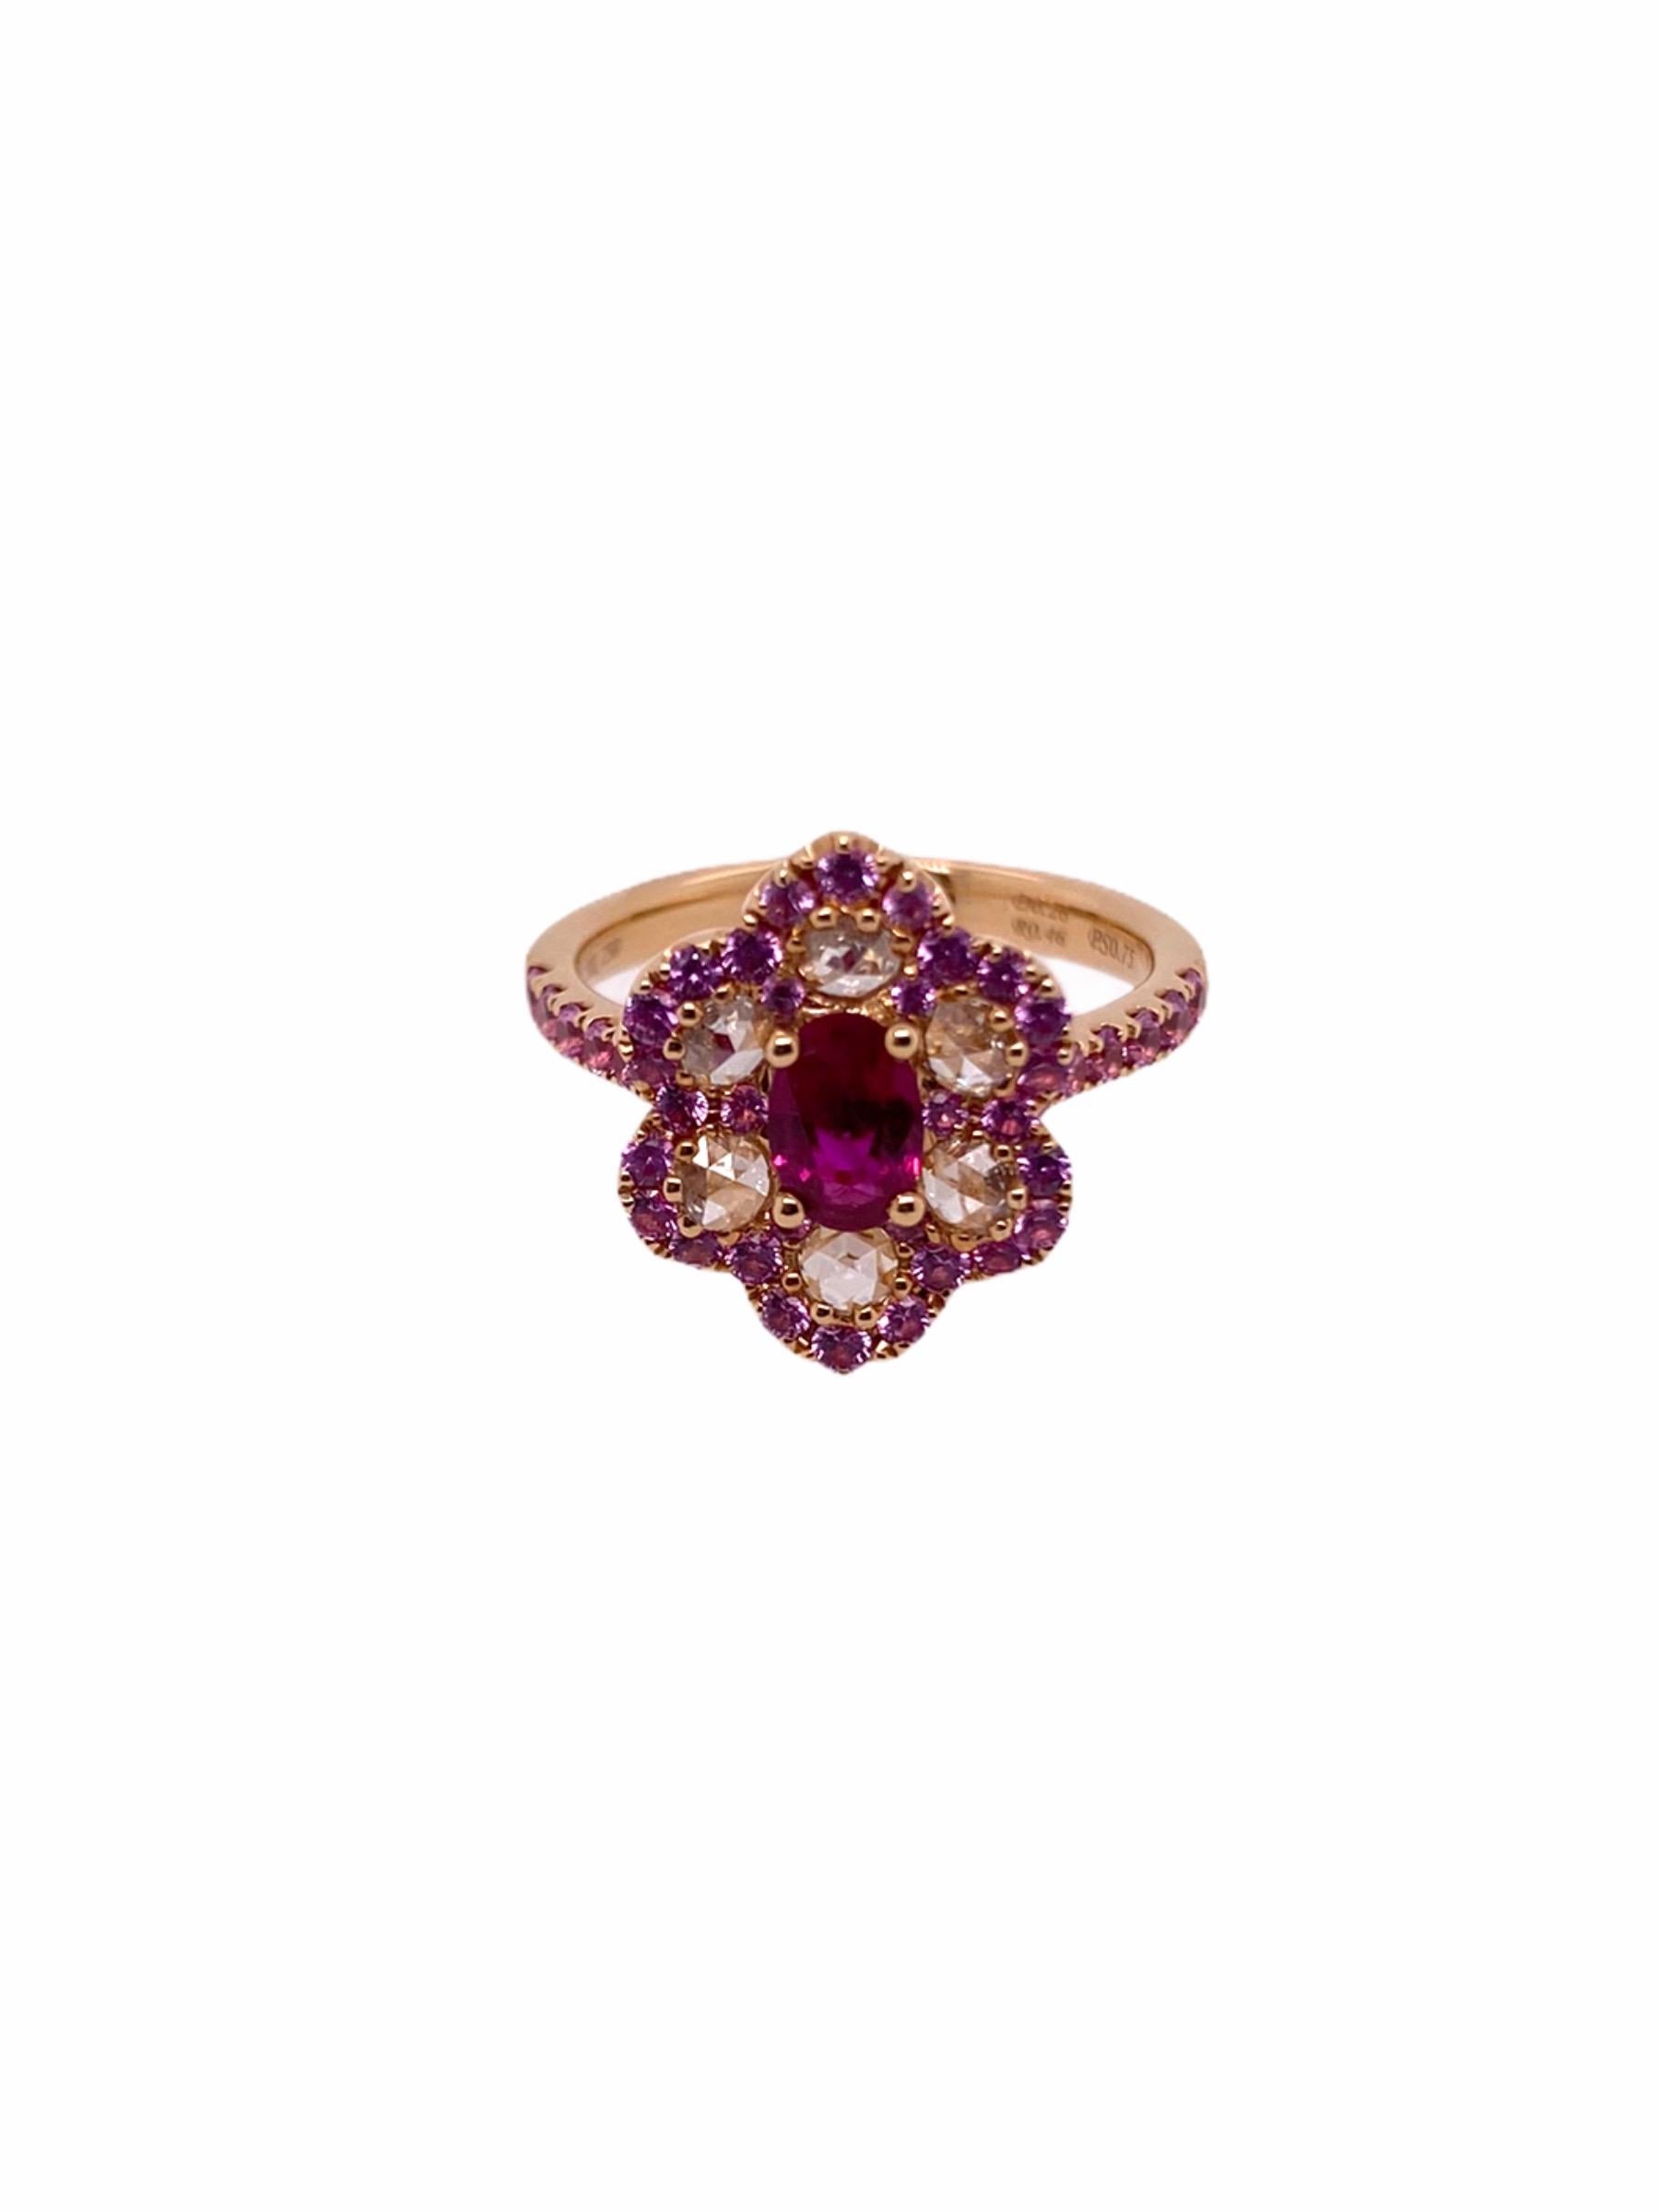 PARIS Craft House Minimal Floral Ring. Featured on this is a combination of different gems. At the center, sits a 0.46ct Oval-cut Ruby adorned with 6 Round Diamonds making the silhouette of a flower. Around them are  42 Pink Sapphires beautifully